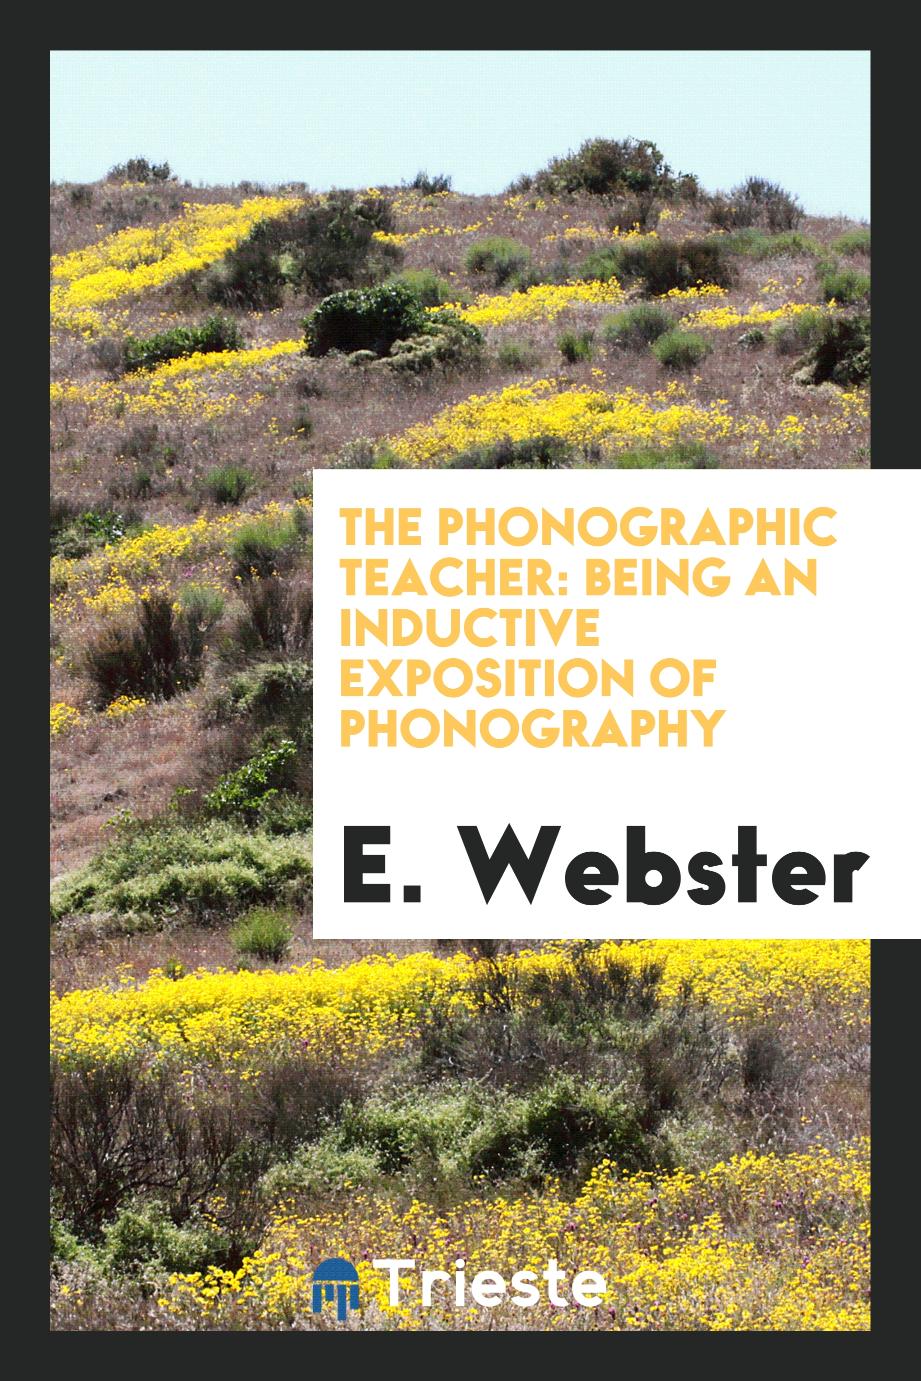 The Phonographic Teacher: Being an Inductive Exposition of Phonography